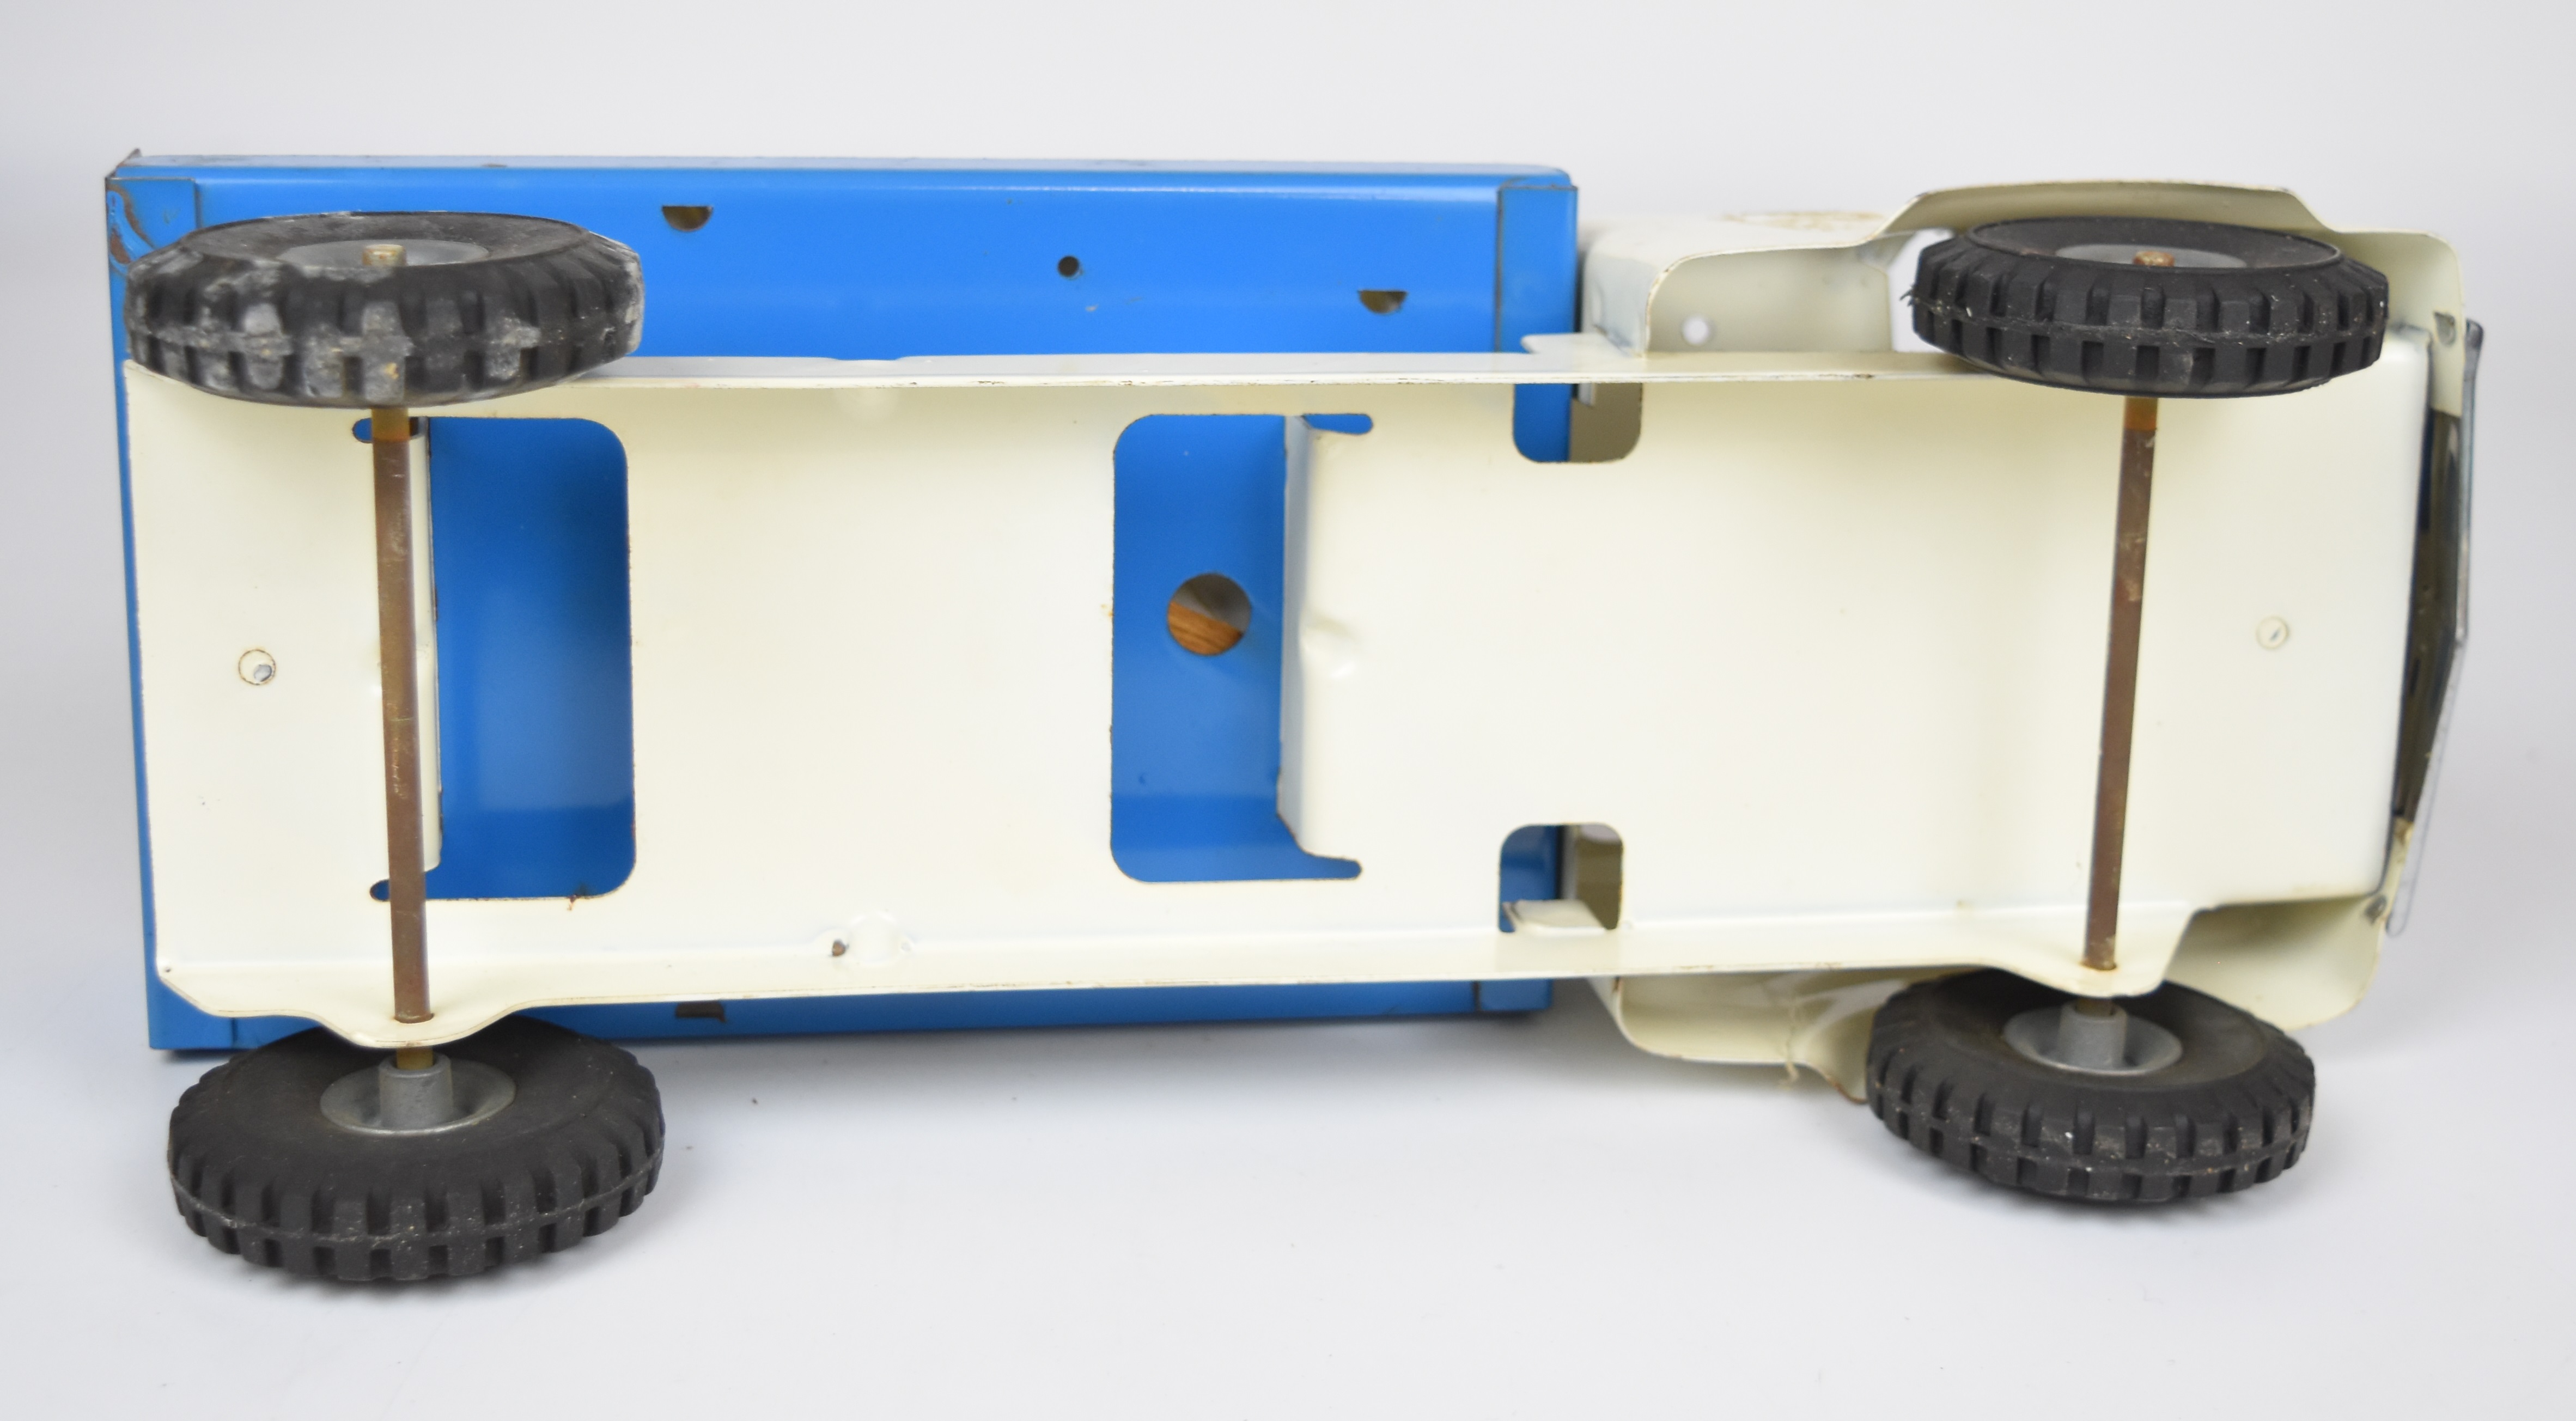 Tri-ang pressed steel milk truck or float with white cab and blue bed, complete with milk bottles. - Image 4 of 4